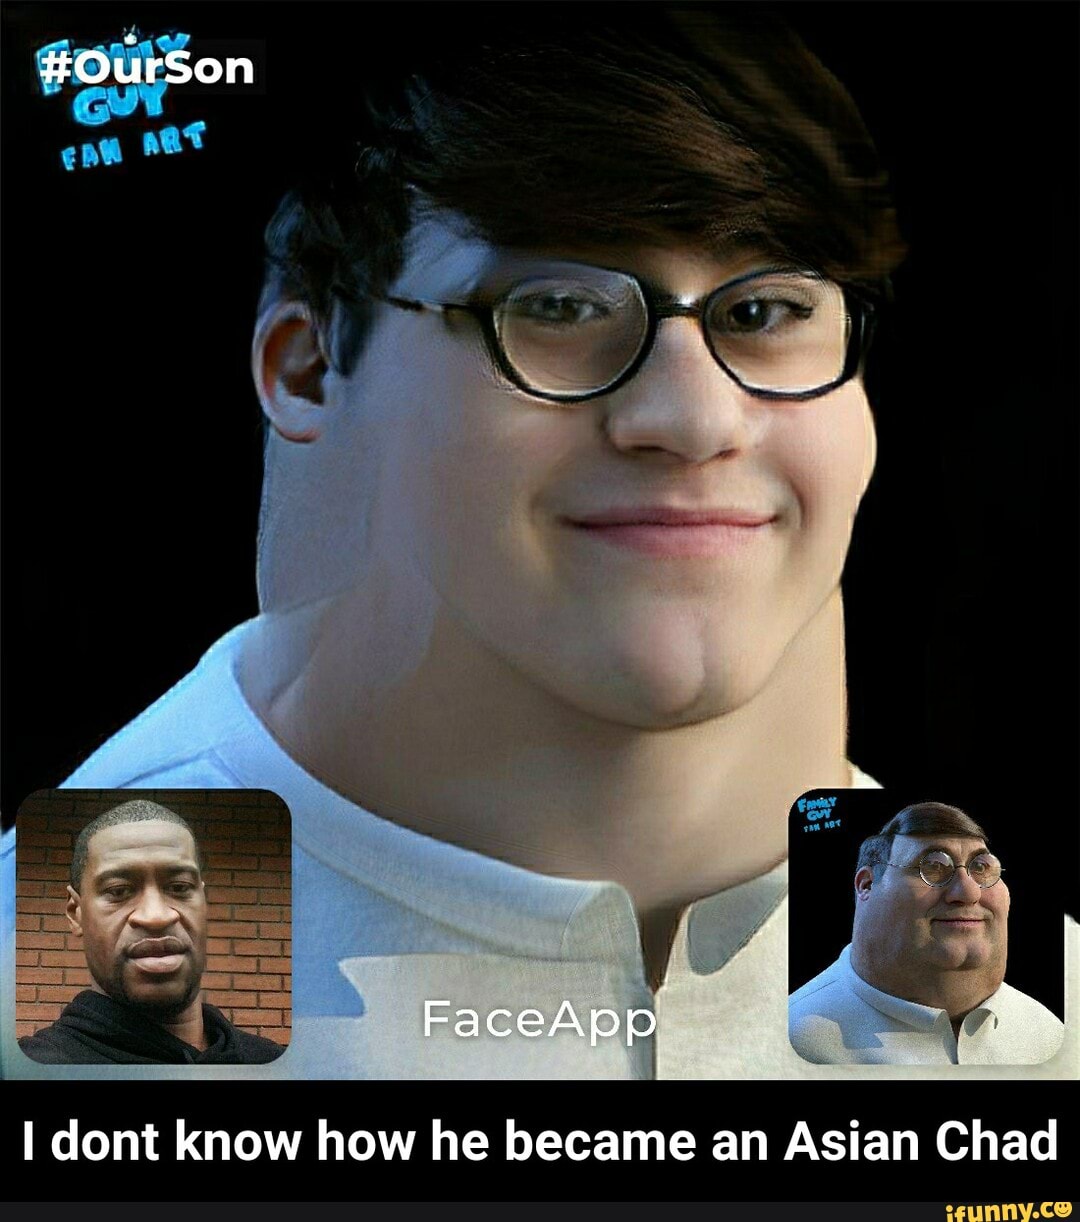 On FaceApp aN I dont know how he became an Asian Chad - I dont